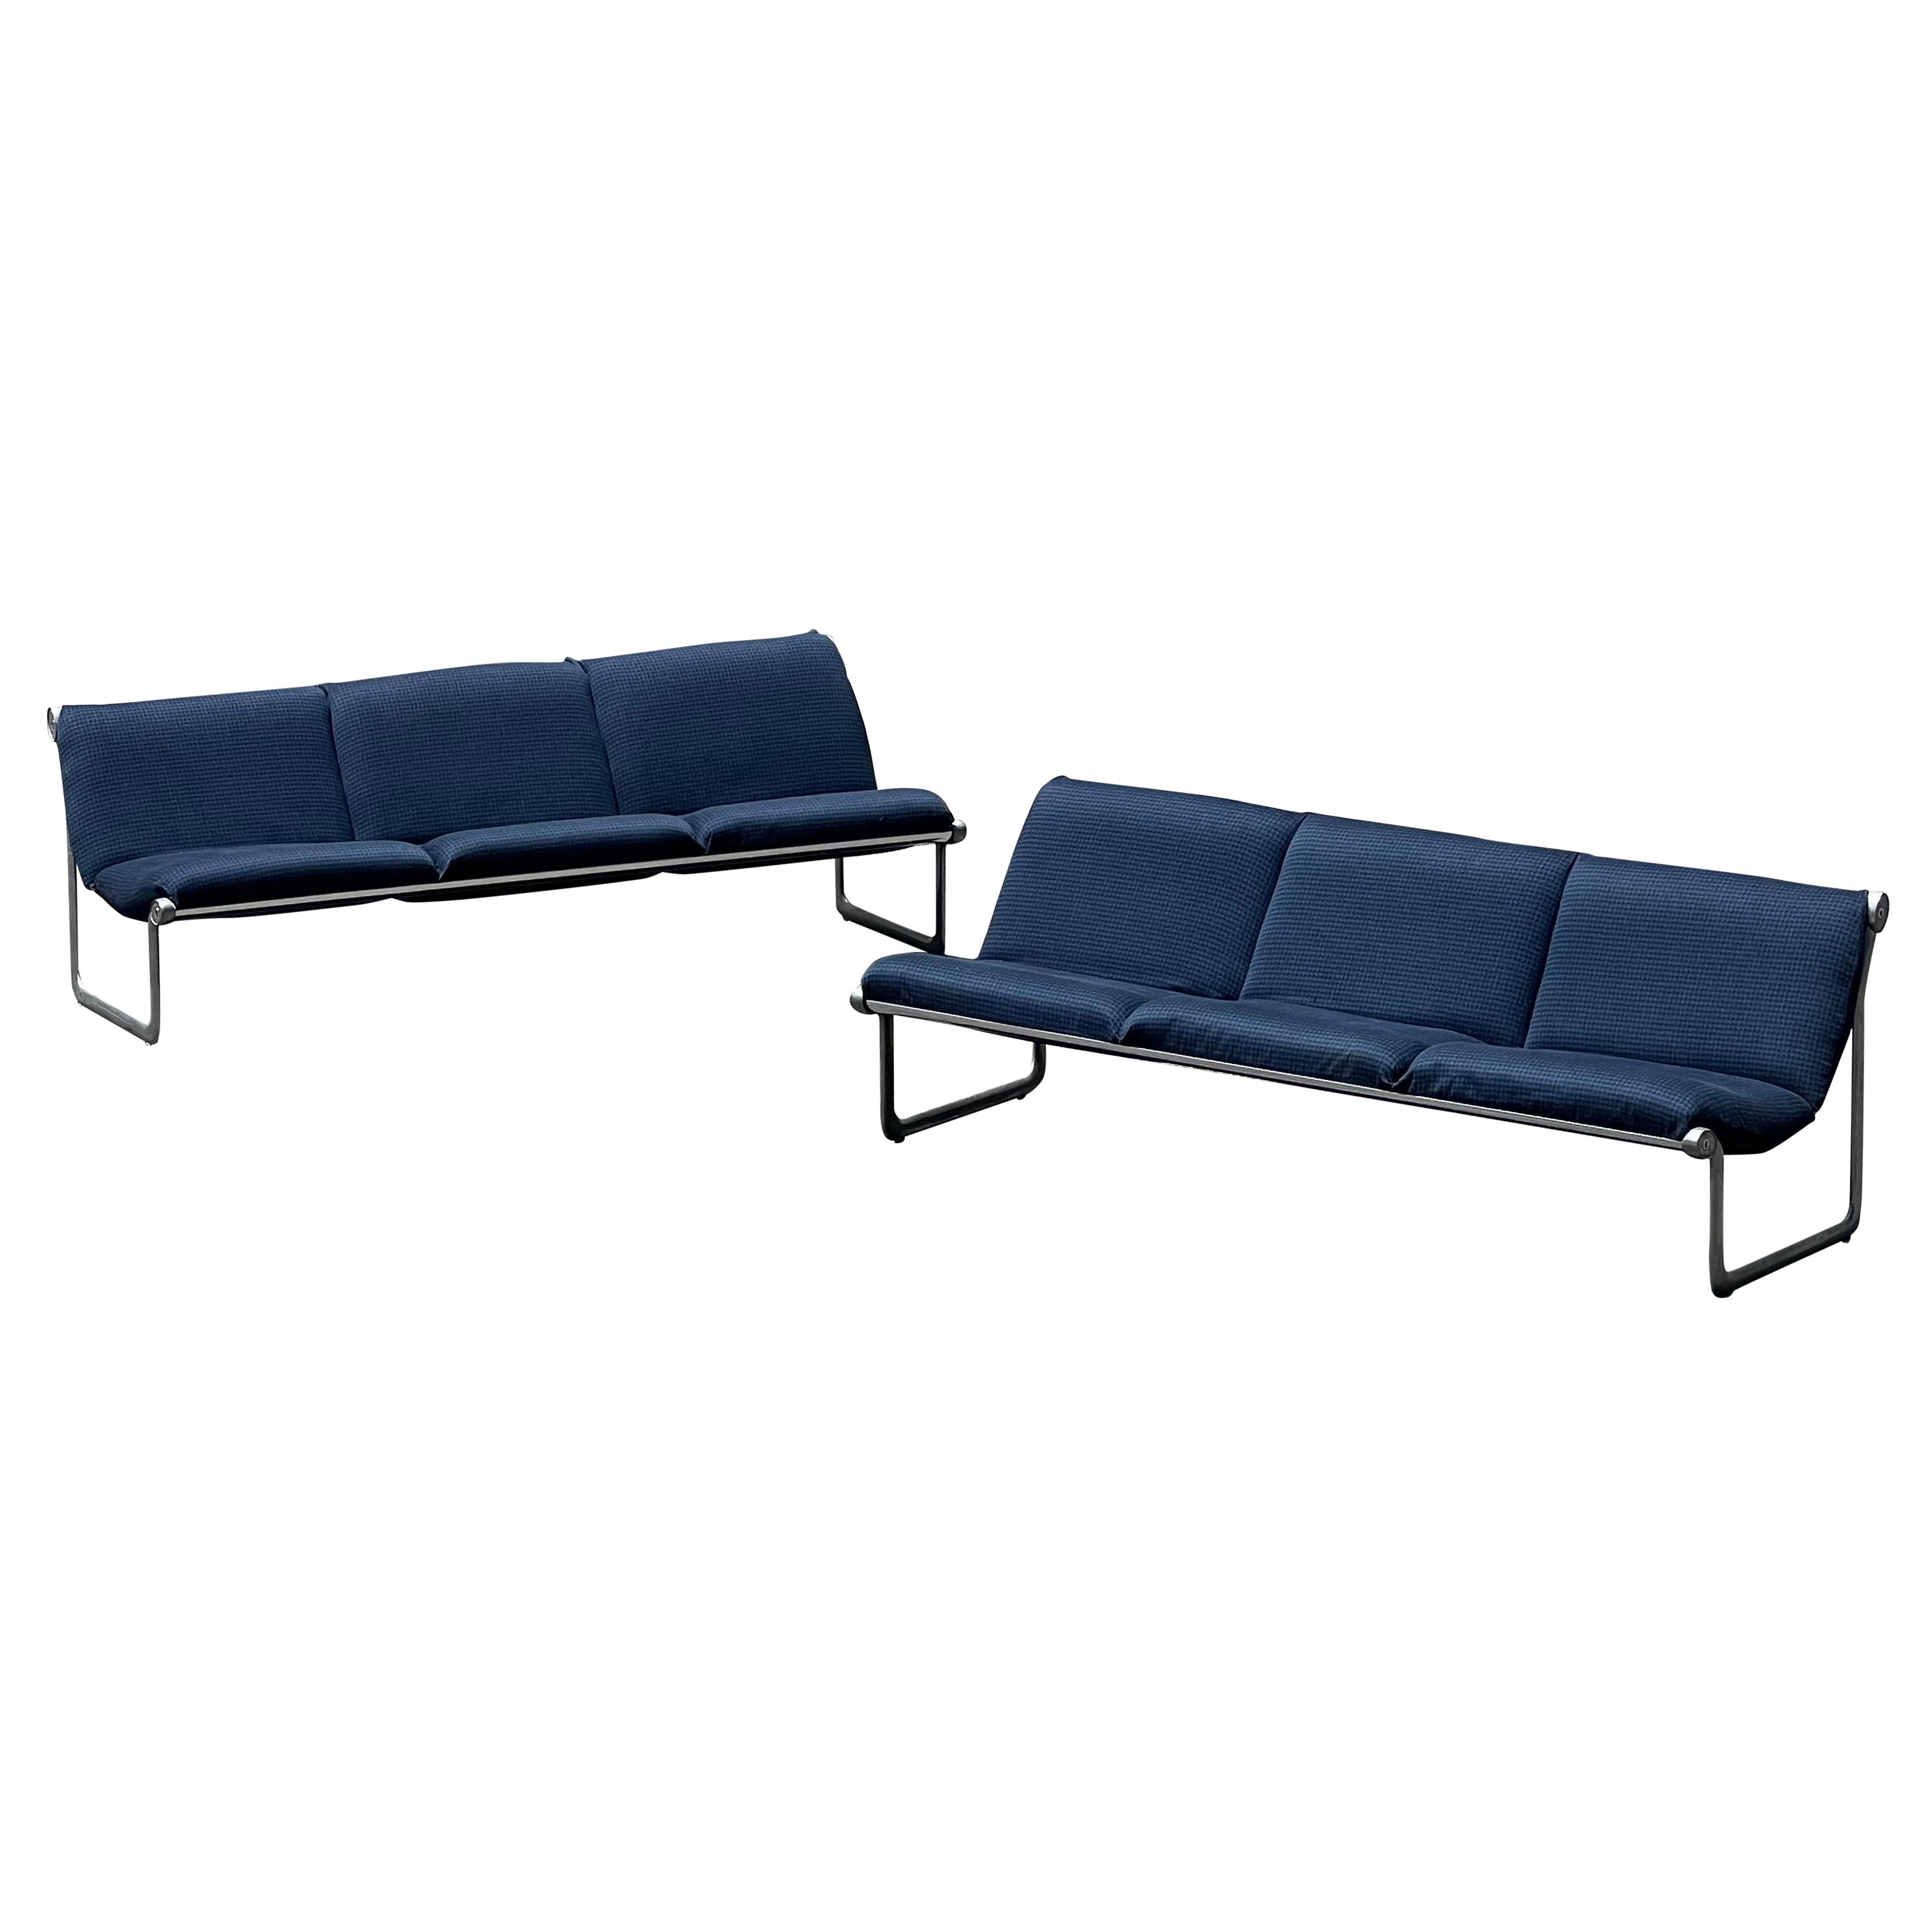 Vintage “Sling” Sofas by Bruce Hannah and Andrew Morrison for Knoll - a Pair